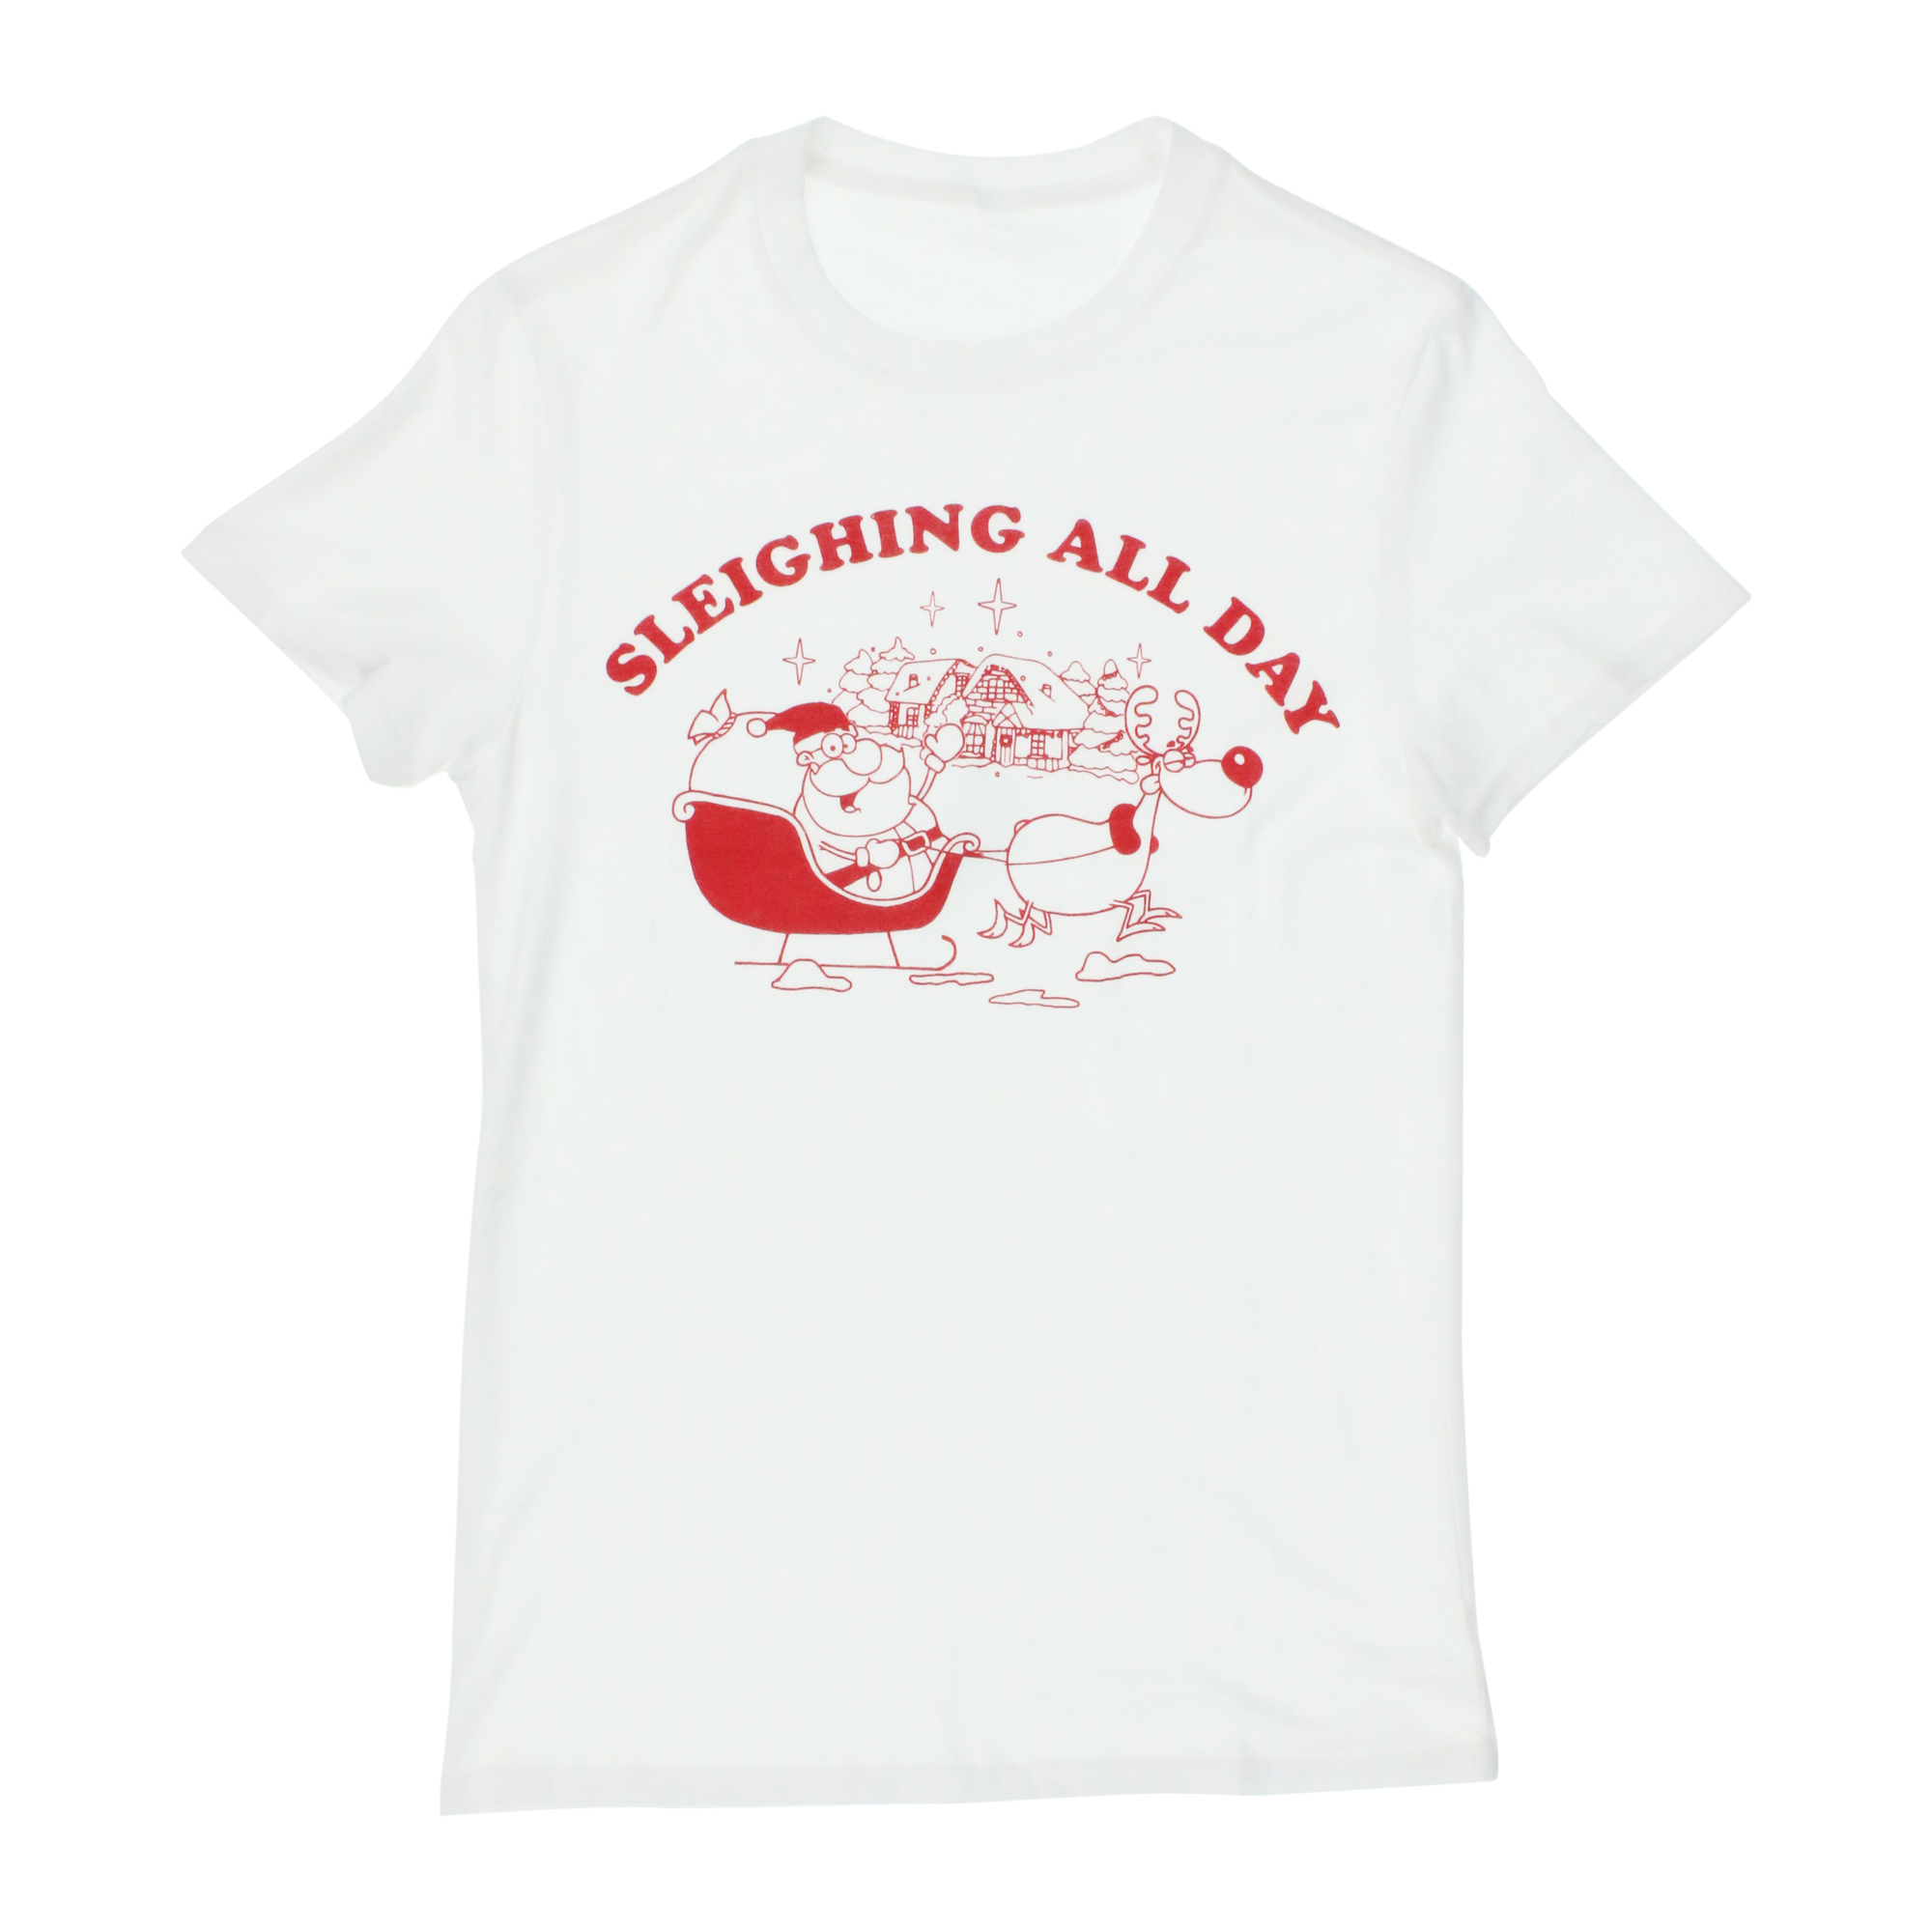 sleighing all day' graphic tee